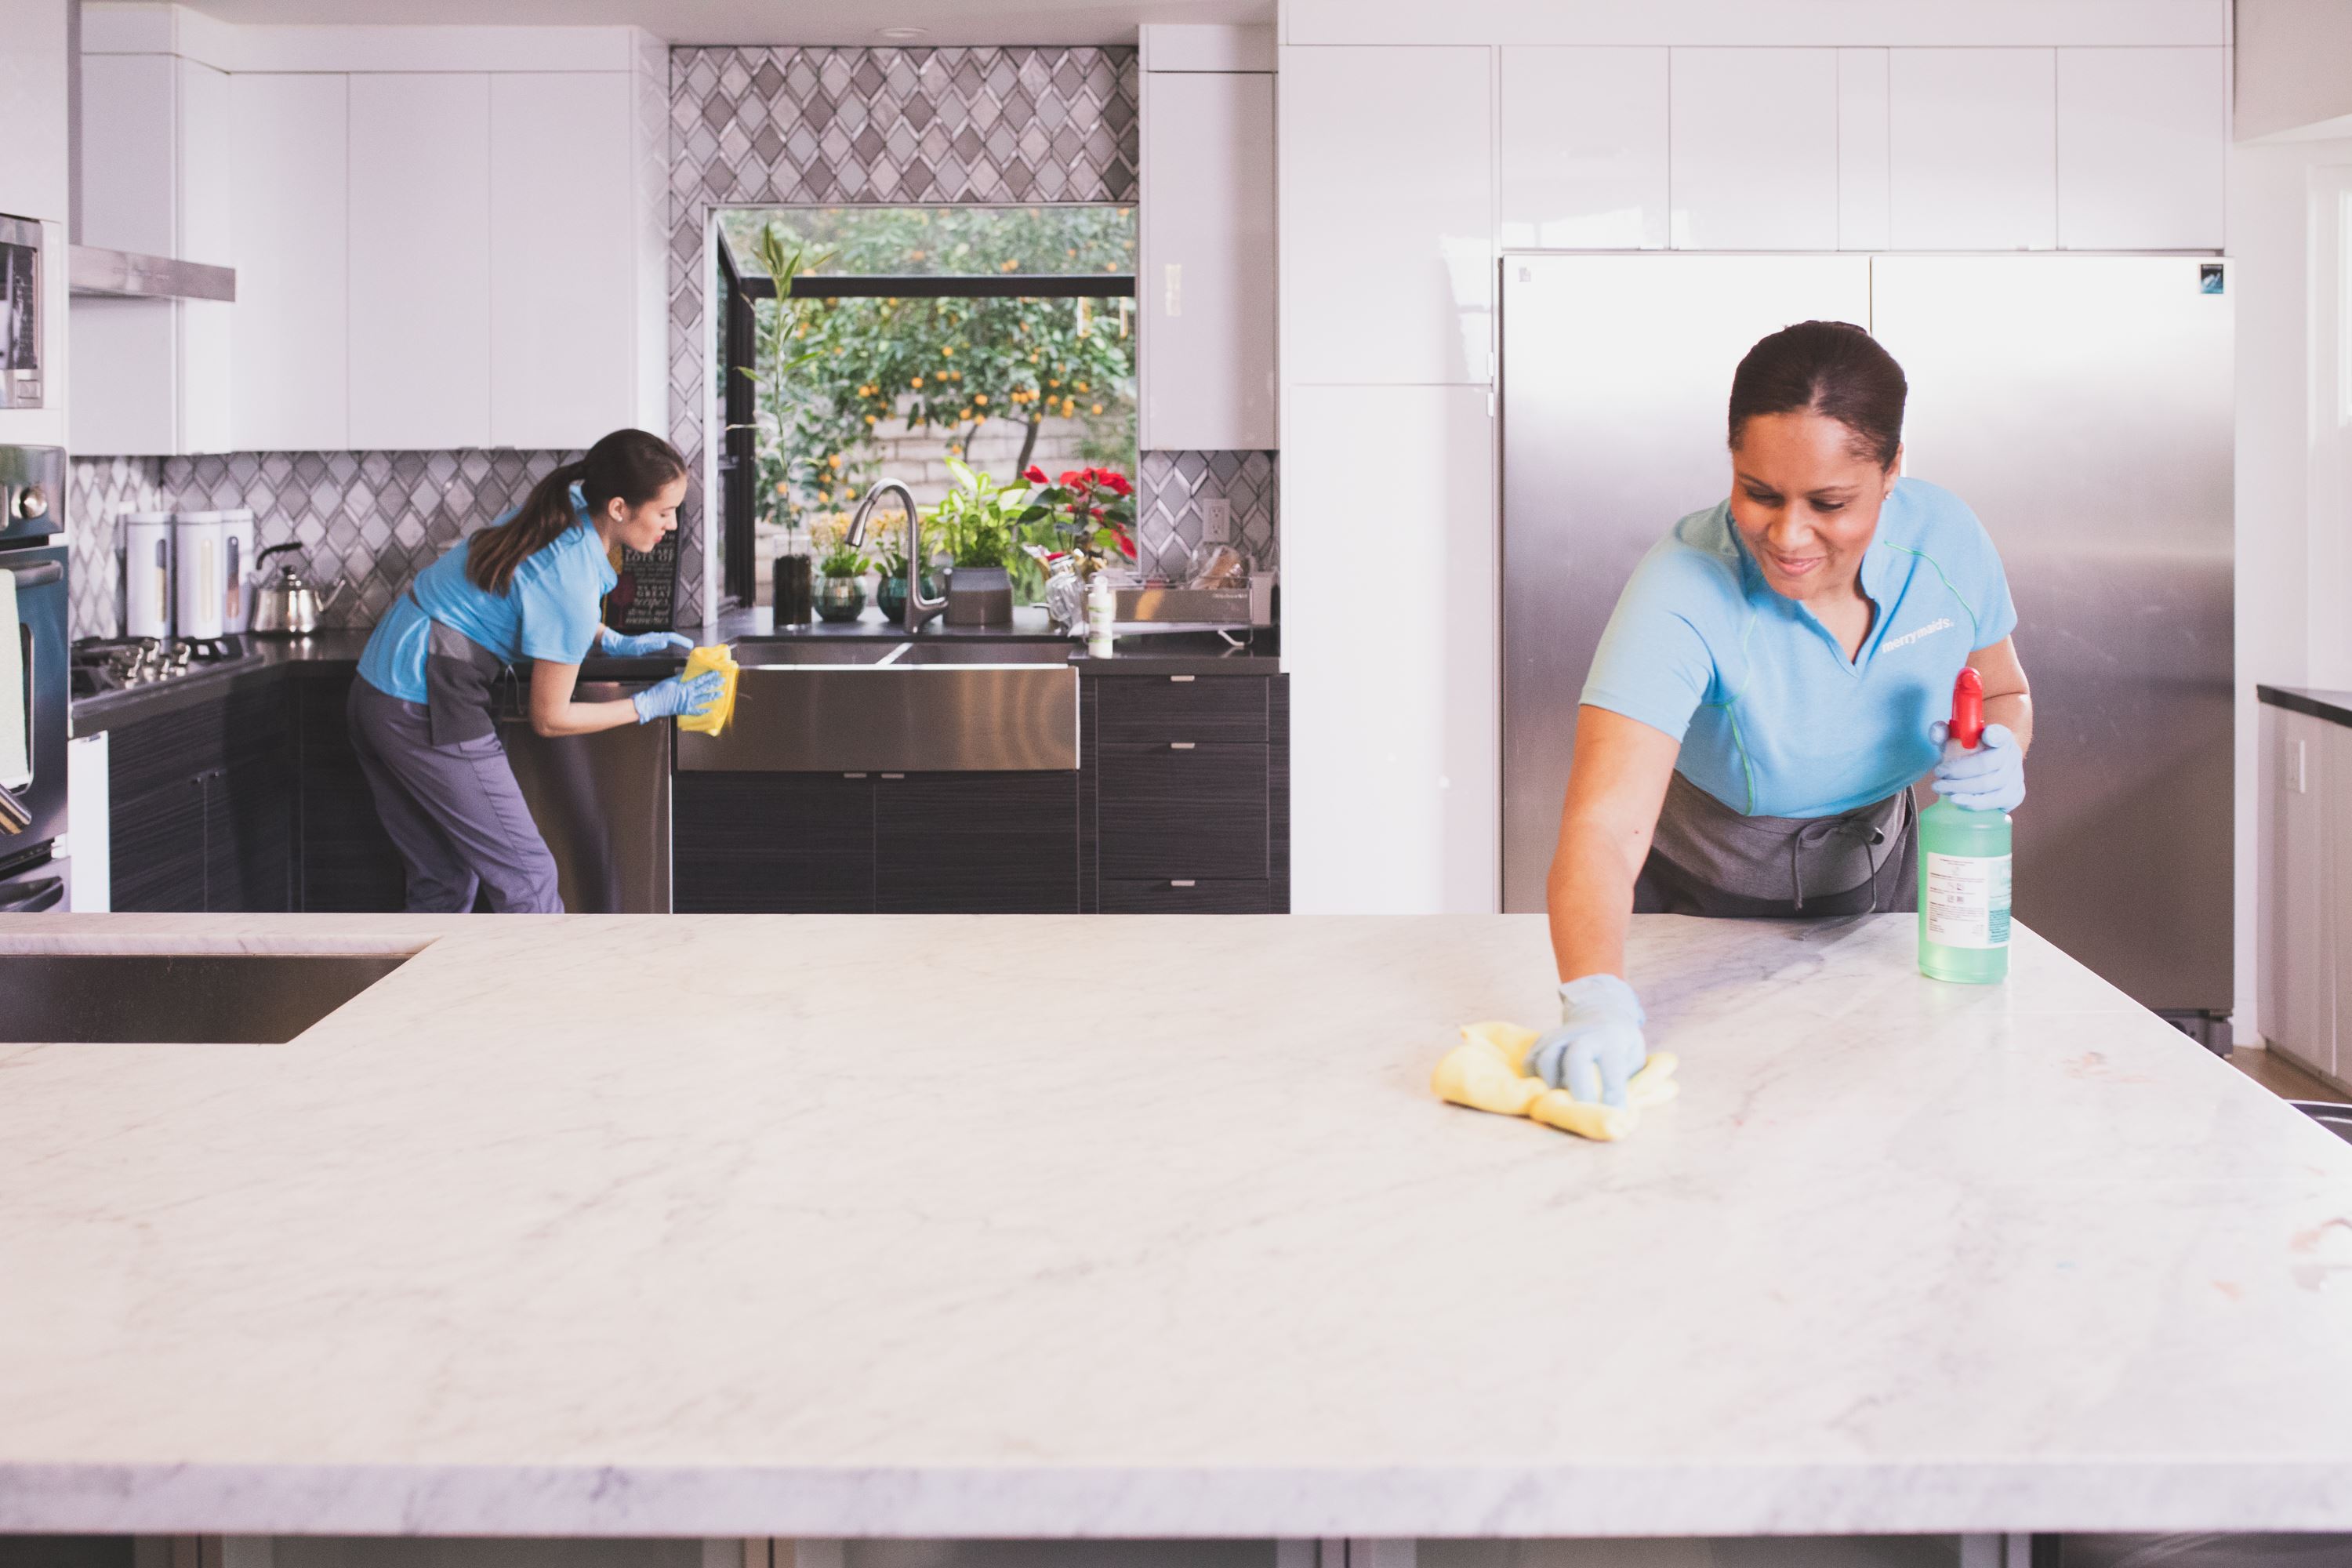  Merry Maids team members sanitizing a kitchen during house cleaning services